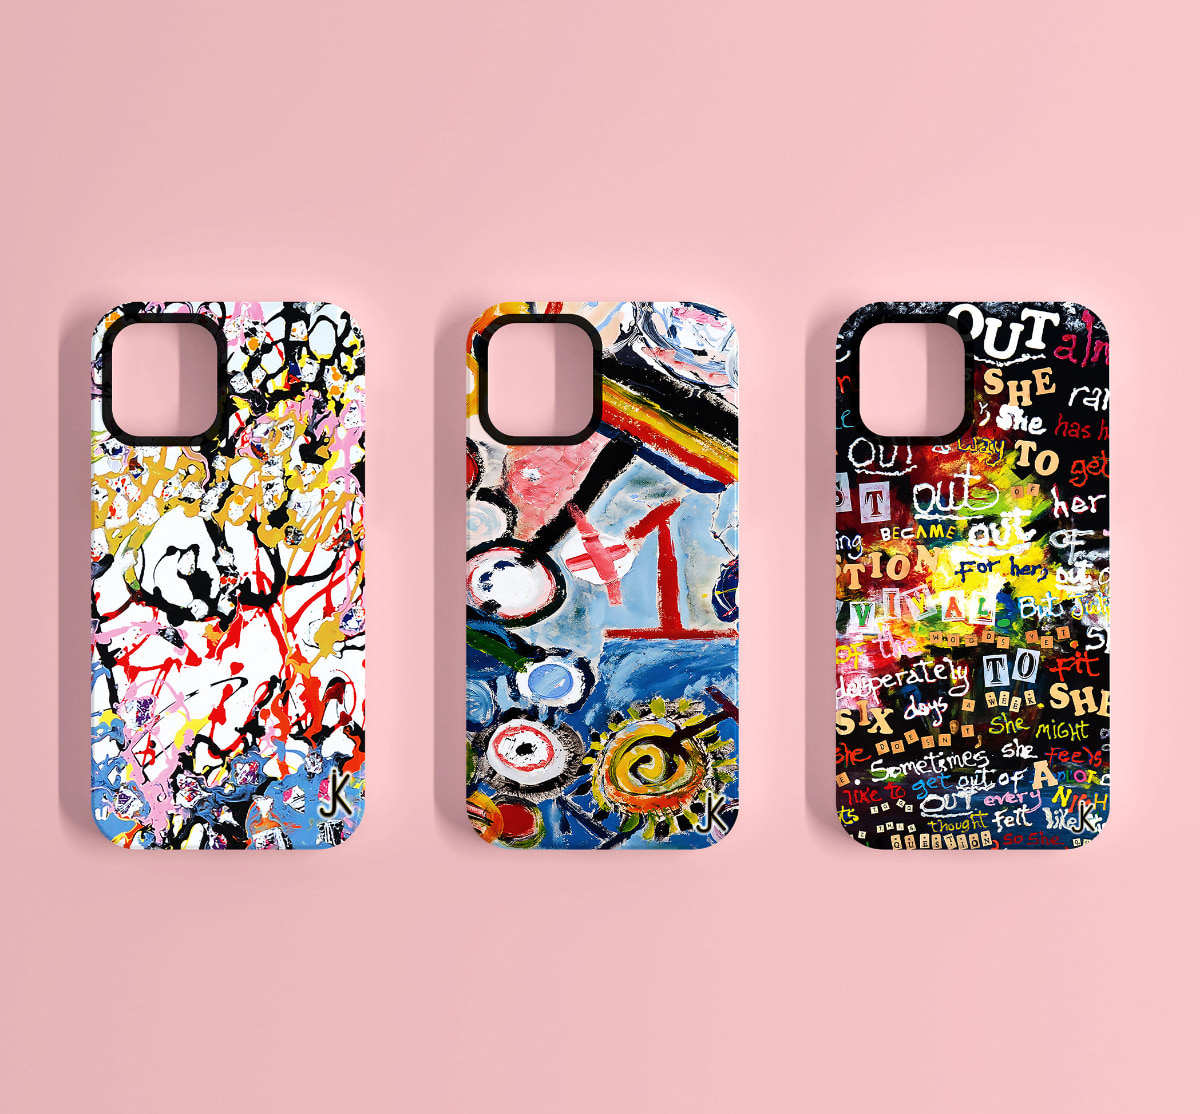 Cellphone Covers